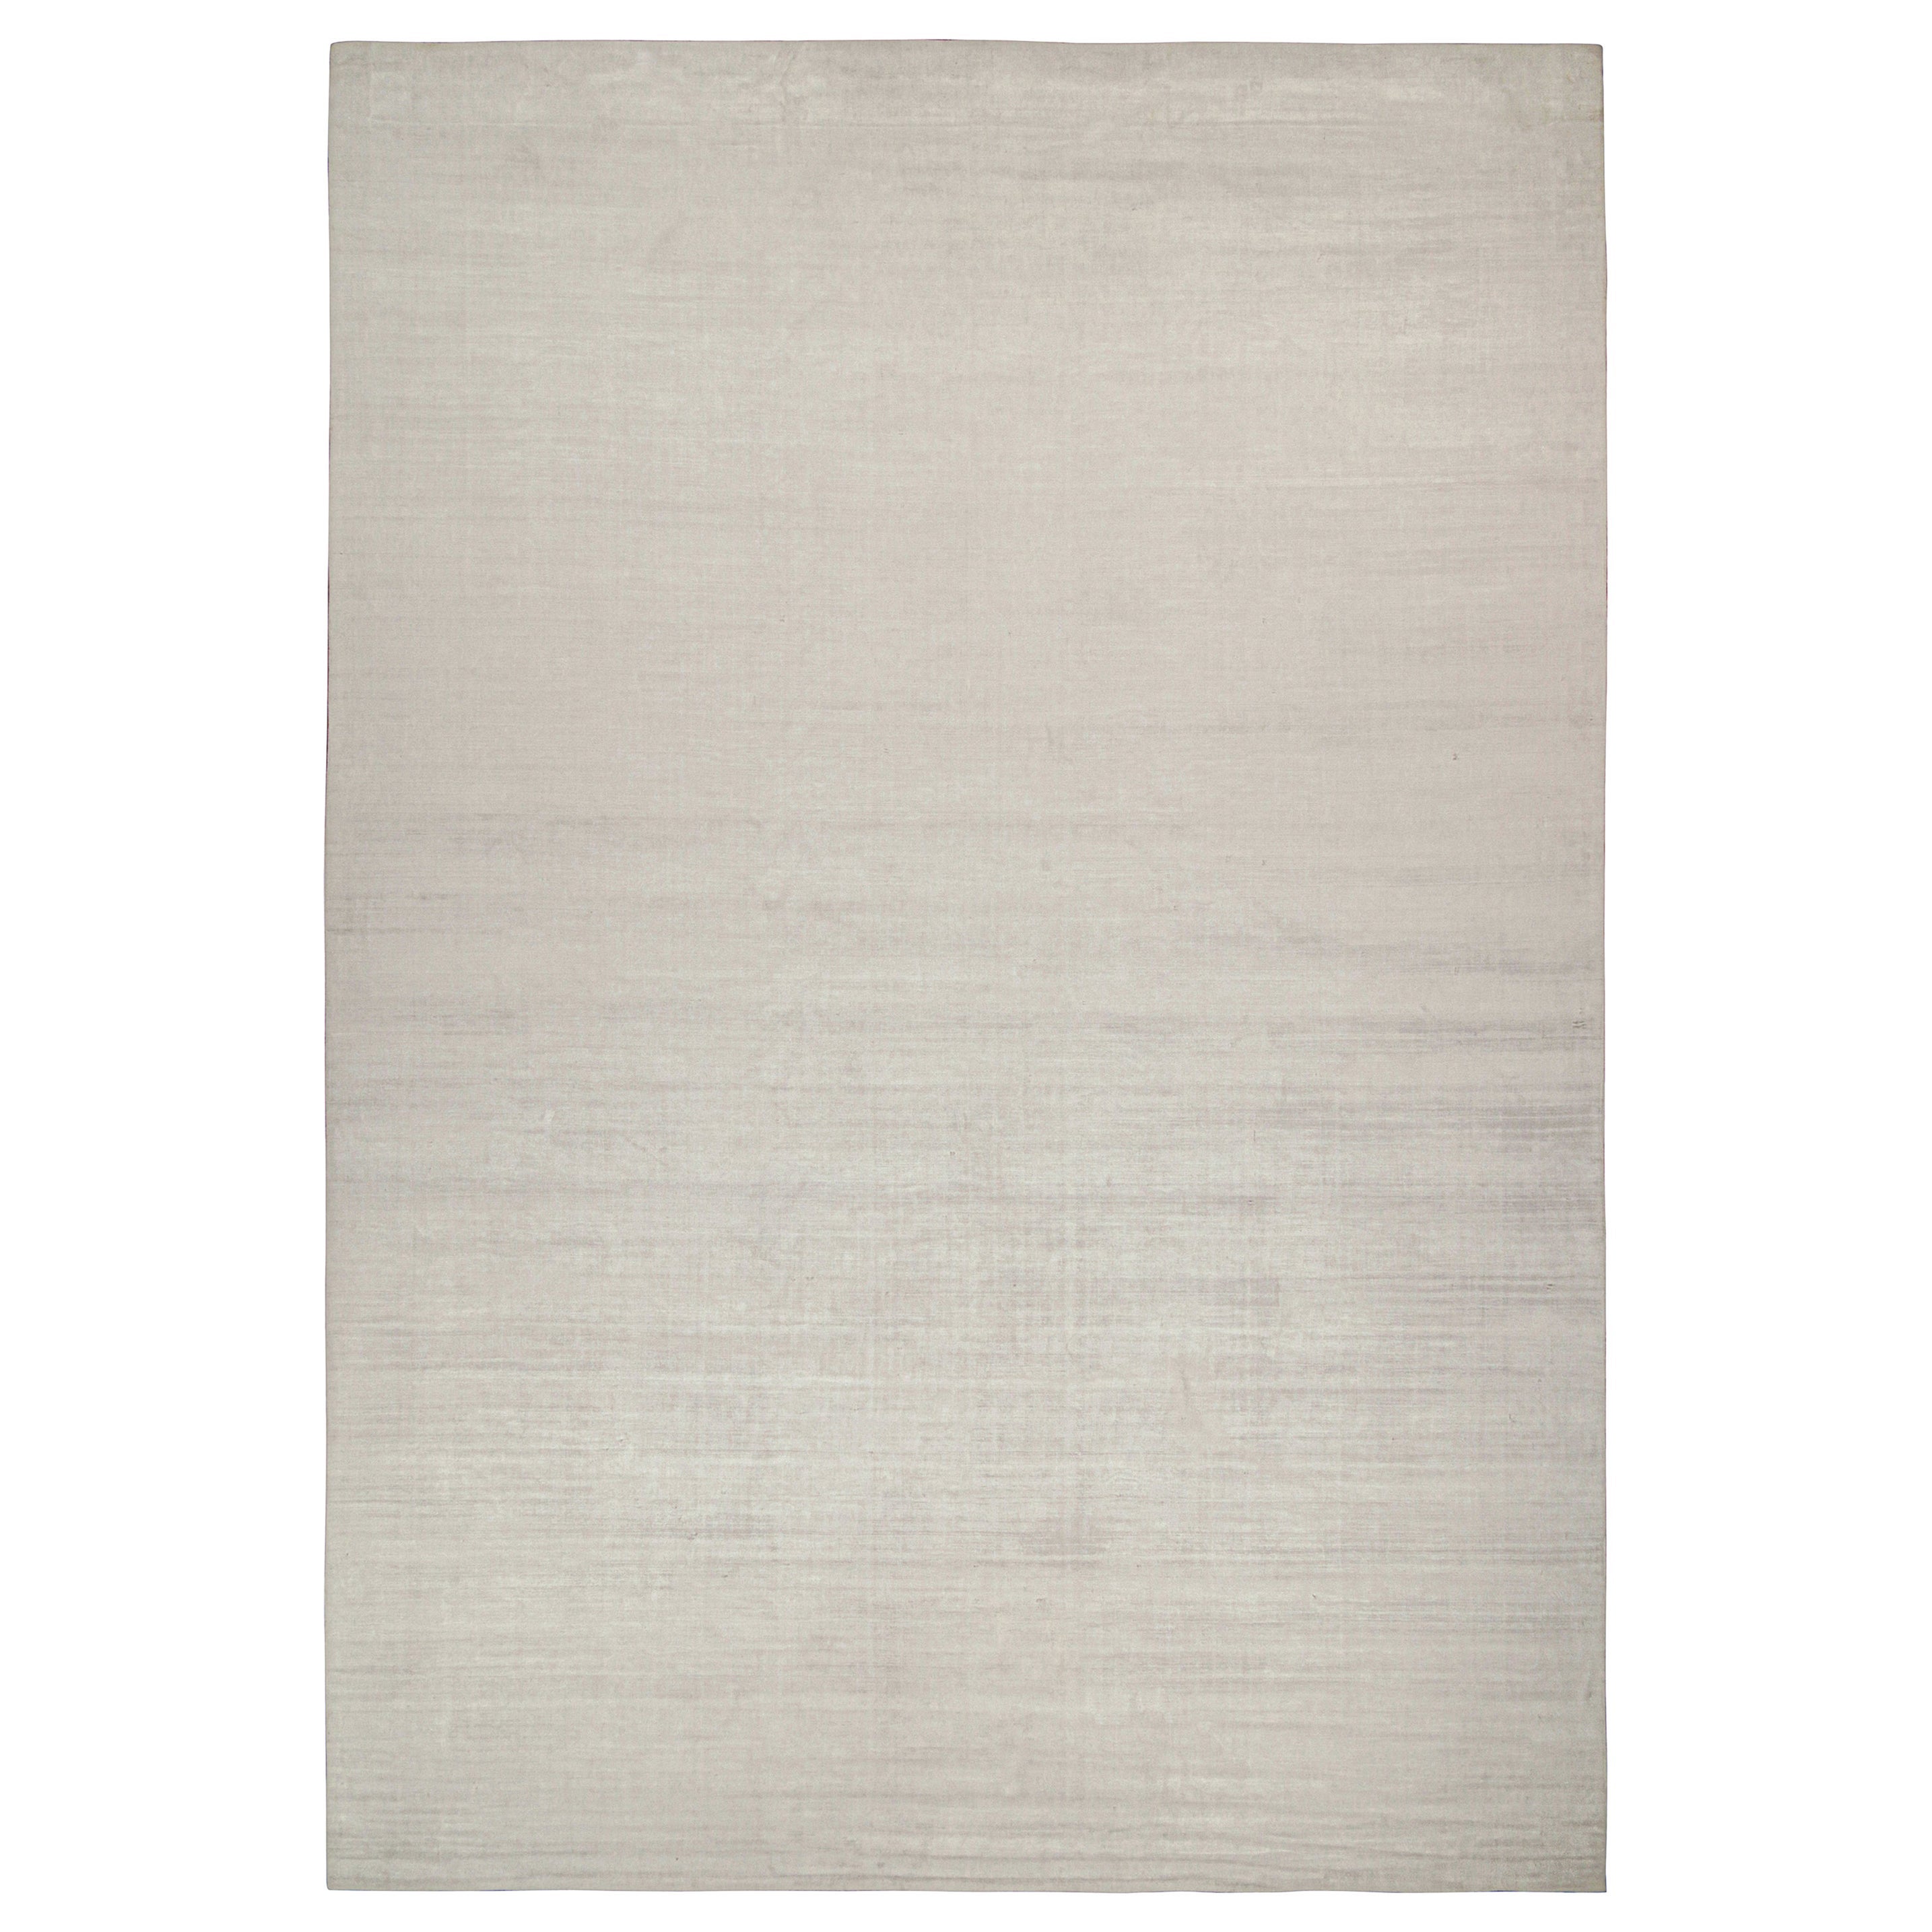 Rug & Kilim’s Plain Modern Rug in Solid Silver and Off-White Tone-on-Tone For Sale